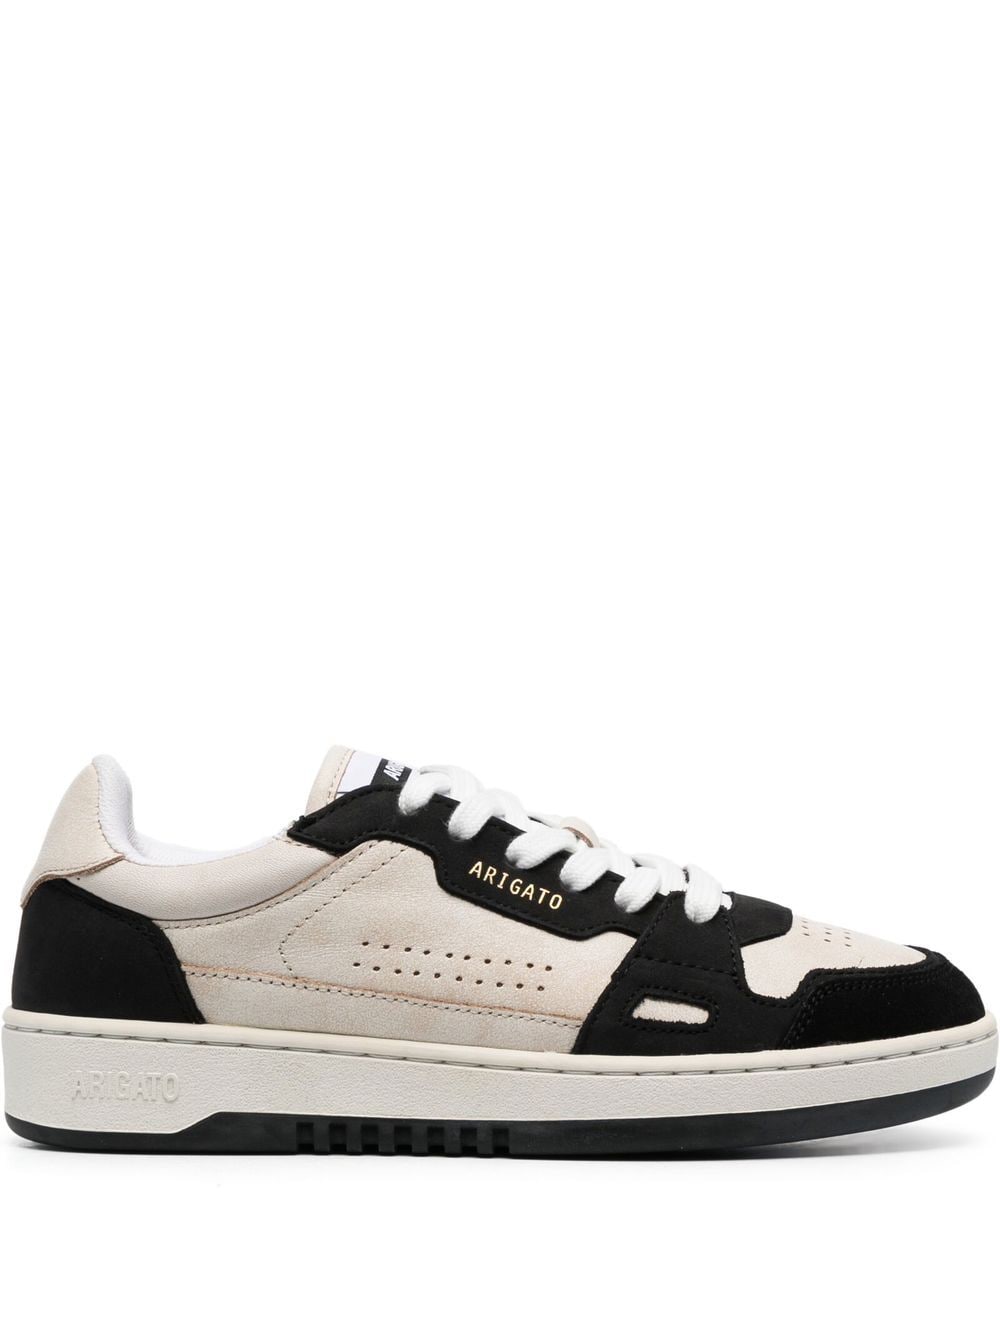 AXEL ARIGATO DICE LO PANELLED SNEAKERS